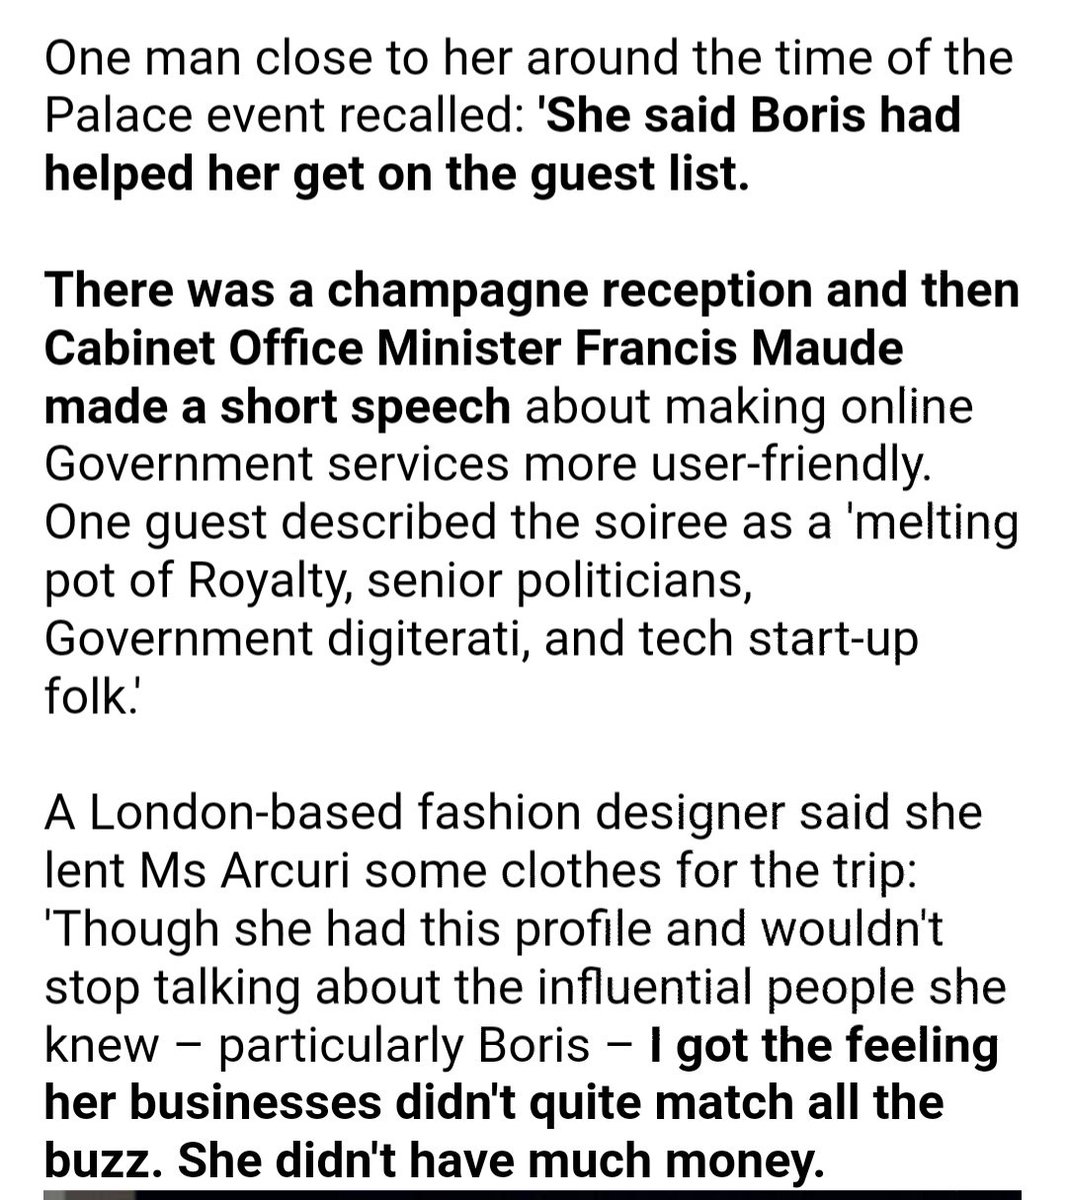 Randy Andy: 'A real cutie'.After Boris arranged for her to be put on the guest list for a party attended by royalty, senior politicians, digiterati and tech startups, Jenny made a bee-line for the Duke of York ...